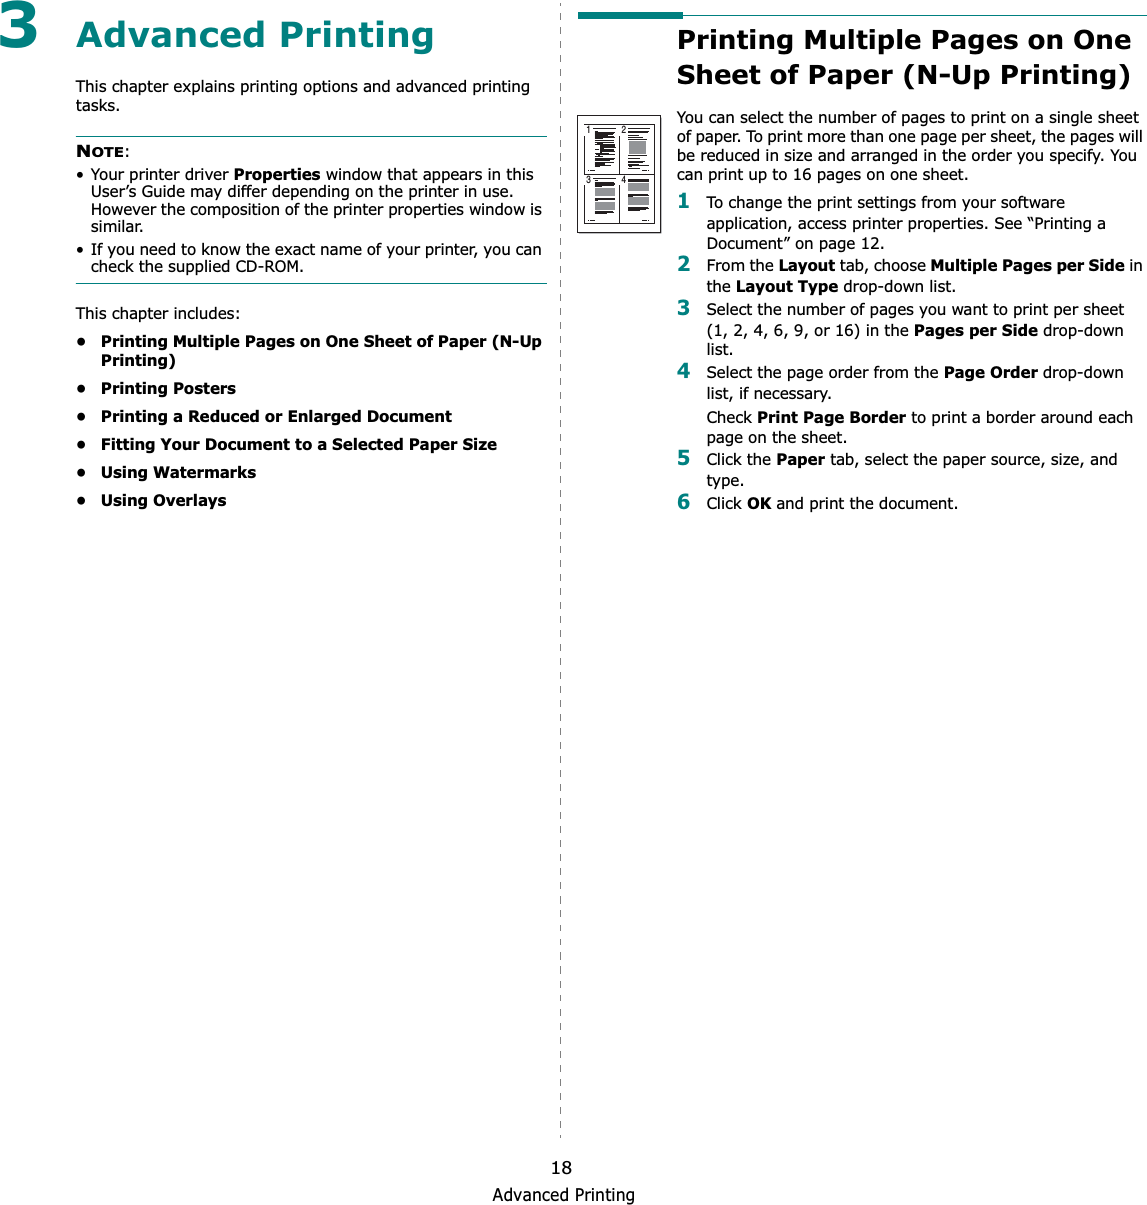 Advanced Printing183Advanced PrintingThis chapter explains printing options and advanced printing tasks. NOTE:• Your printer driver Properties window that appears in this User’s Guide may differ depending on the printer in use. However the composition of the printer properties window is similar.• If you need to know the exact name of your printer, you can check the supplied CD-ROM.This chapter includes:• Printing Multiple Pages on One Sheet of Paper (N-Up Printing)•Printing Posters• Printing a Reduced or Enlarged Document• Fitting Your Document to a Selected Paper Size•Using Watermarks•Using OverlaysPrinting Multiple Pages on One Sheet of Paper (N-Up Printing) You can select the number of pages to print on a single sheet of paper. To print more than one page per sheet, the pages will be reduced in size and arranged in the order you specify. You can print up to 16 pages on one sheet.  1To change the print settings from your software application, access printer properties. See “Printing a Document” on page 12.2From the Layout tab, choose Multiple Pages per Side in the Layout Type drop-down list. 3Select the number of pages you want to print per sheet (1, 2, 4, 6, 9, or 16) in the Pages per Side drop-down list.4Select the page order from the Page Order drop-down list, if necessary.Check Print Page Border to print a border around each page on the sheet. 5Click the Paper tab, select the paper source, size, and type.6Click OK and print the document. 1 23 4